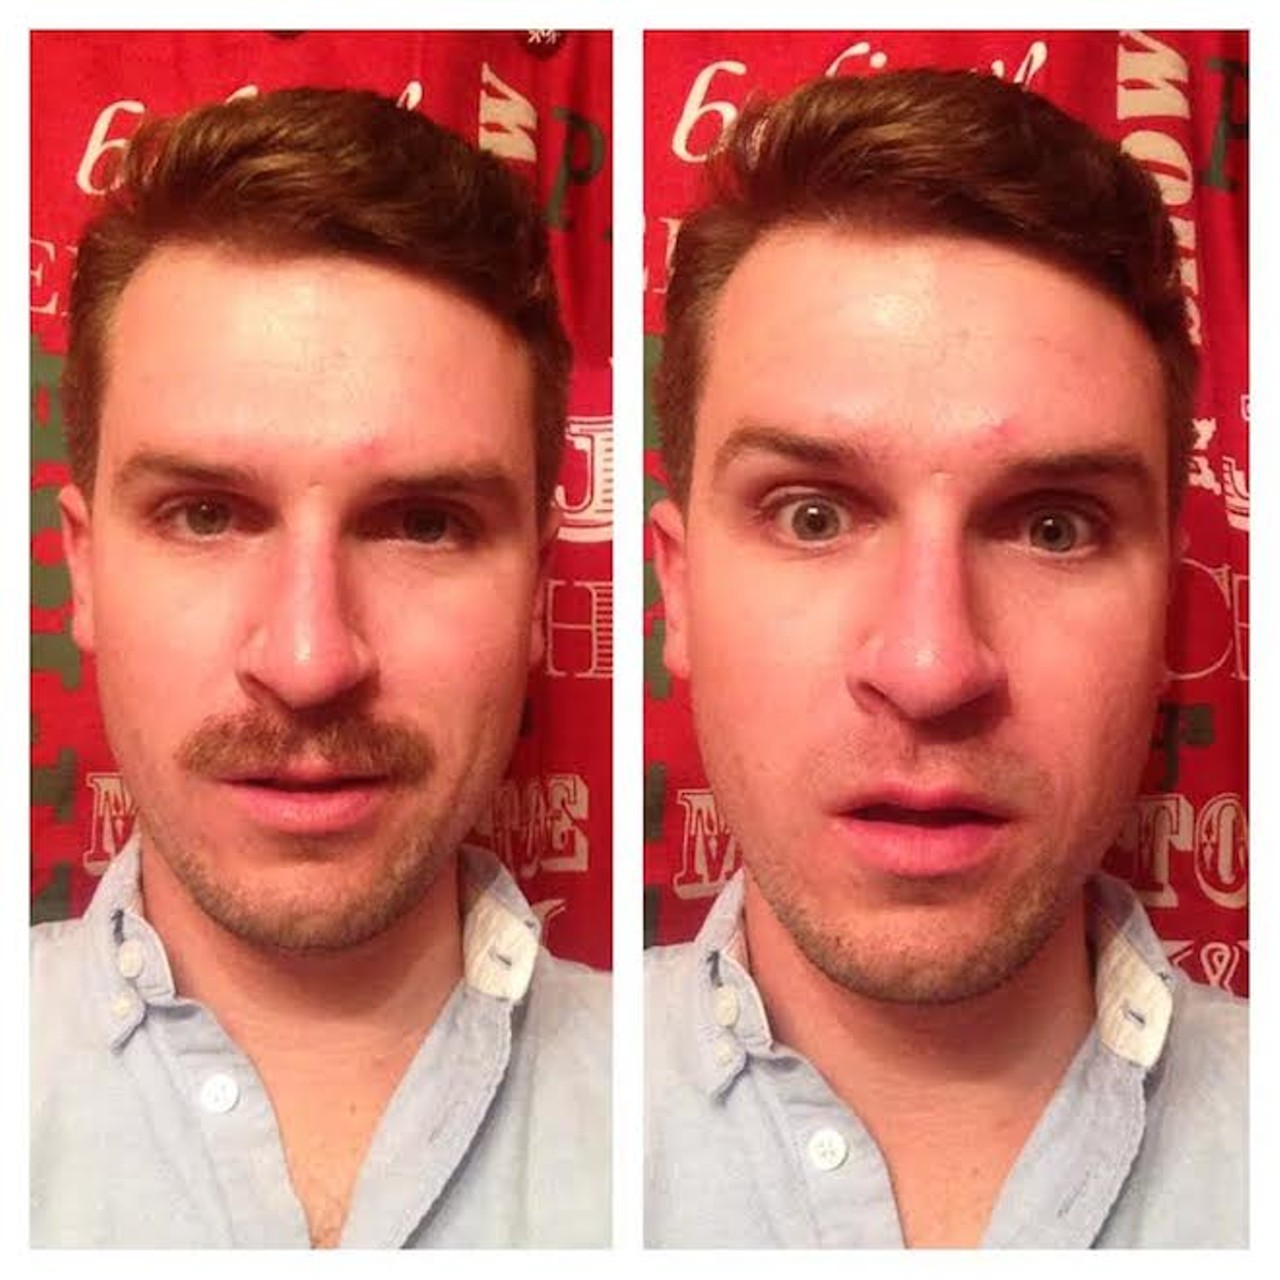 The end of Movember!Related: In honor of Movember: 55 photos from the Beard Envy project